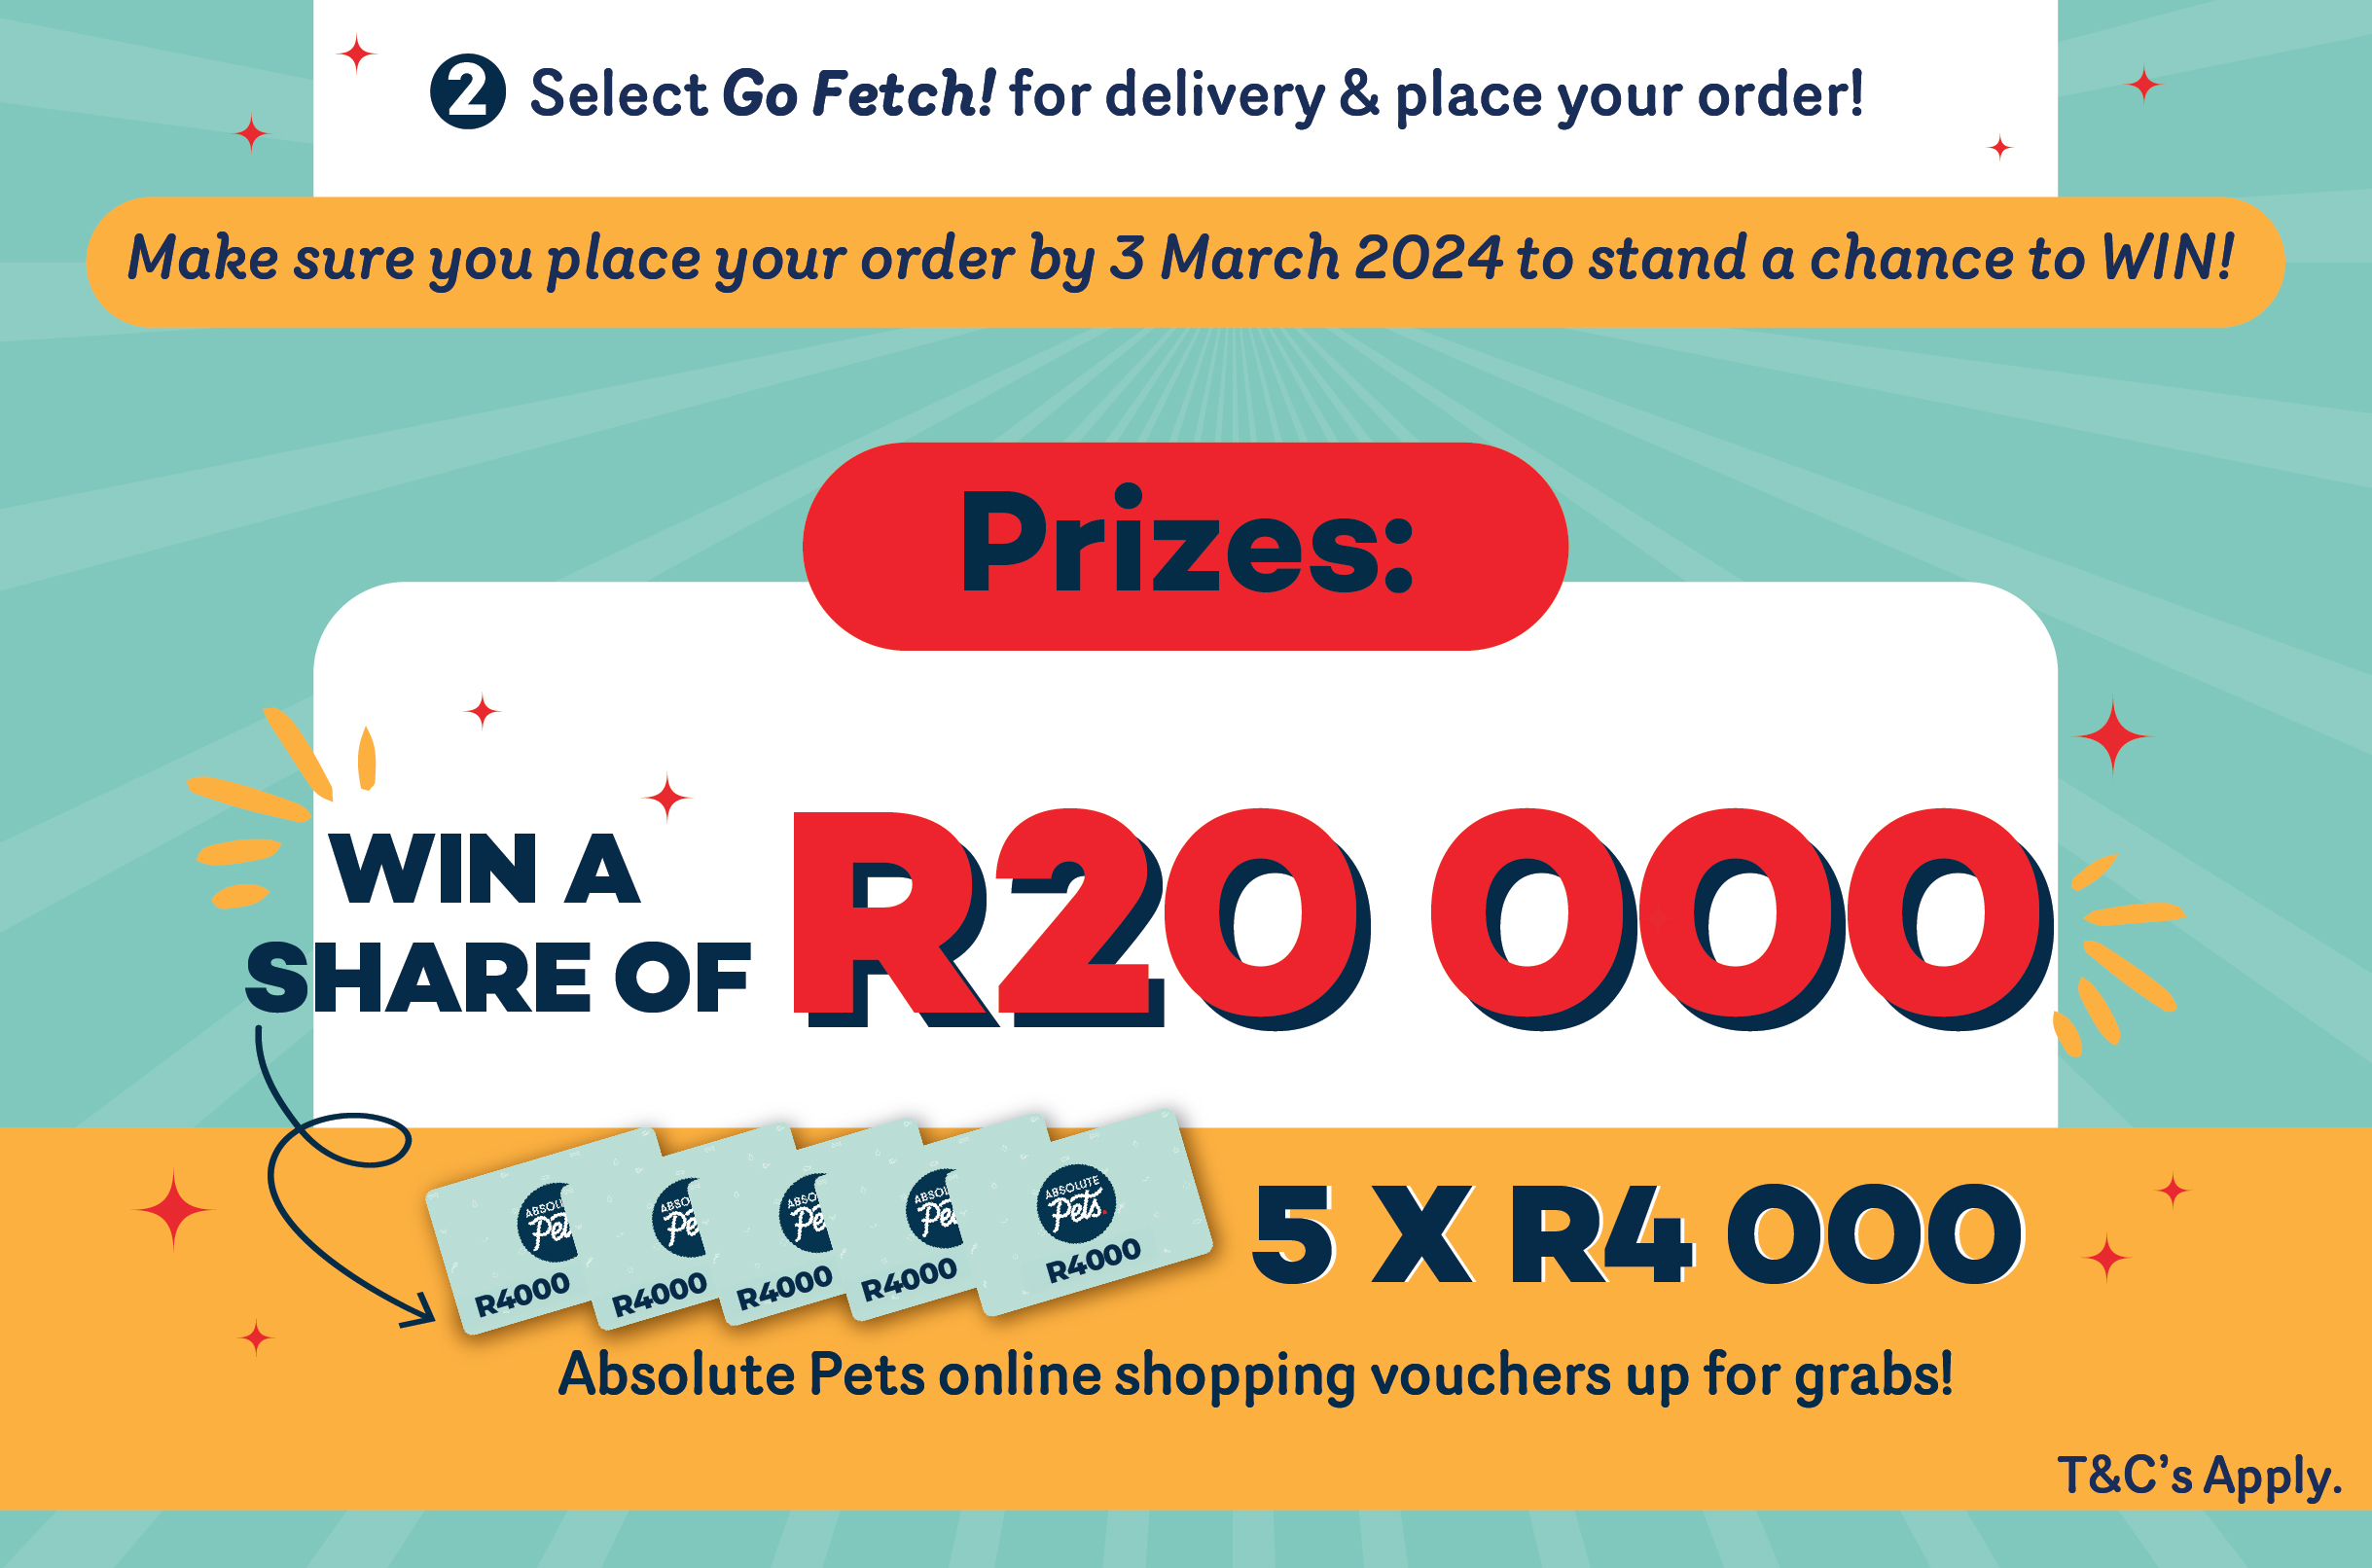 Order & Win easy to enter